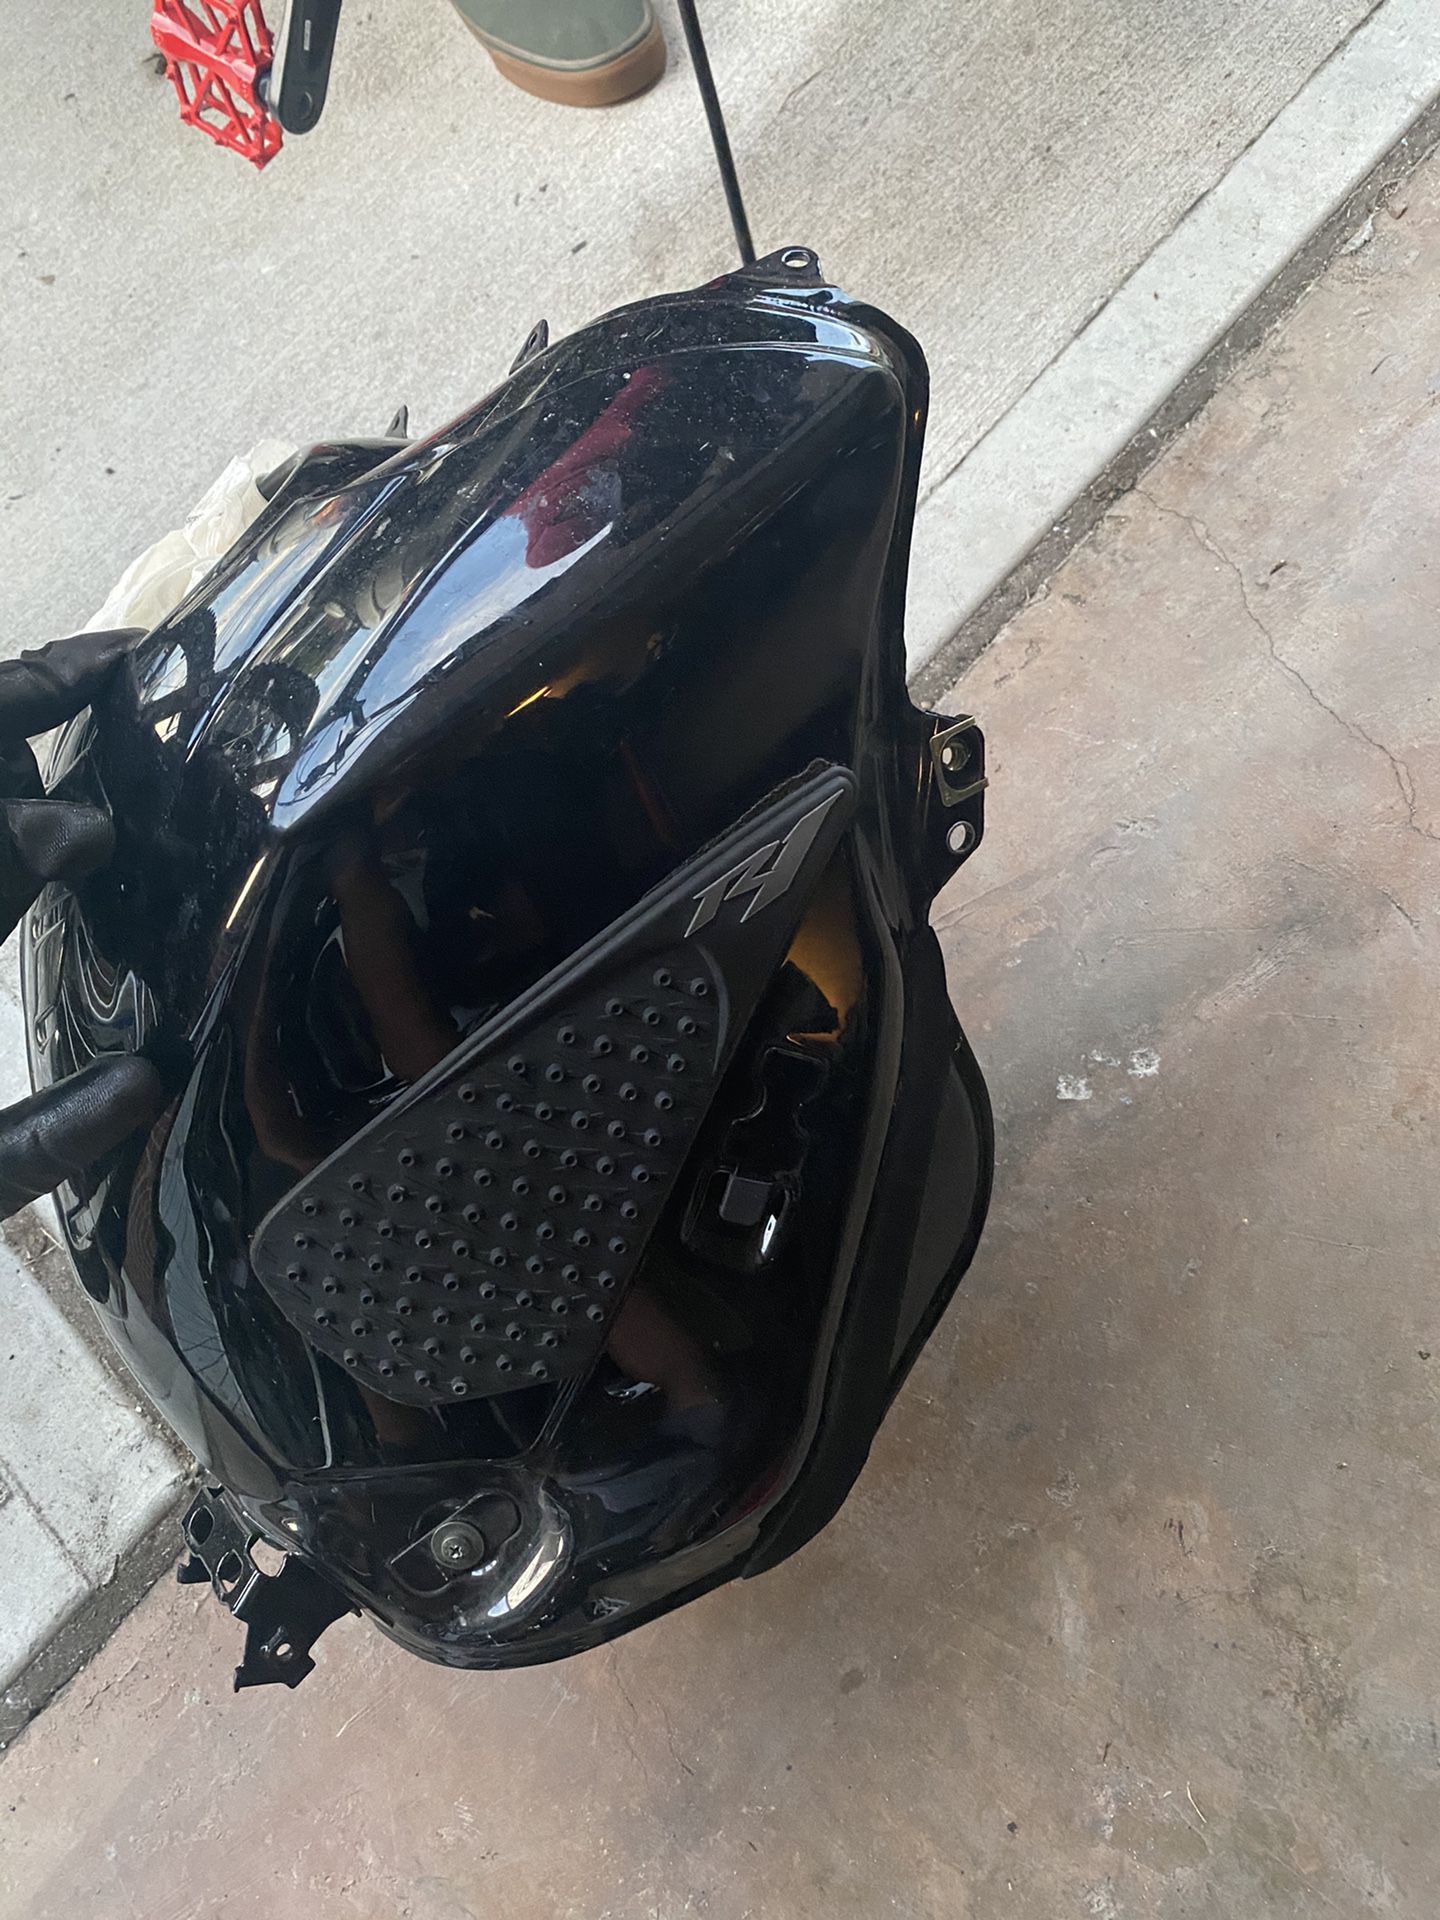 2006 Yamaha R1 PARTS ONLY! (Please Read Sold List)